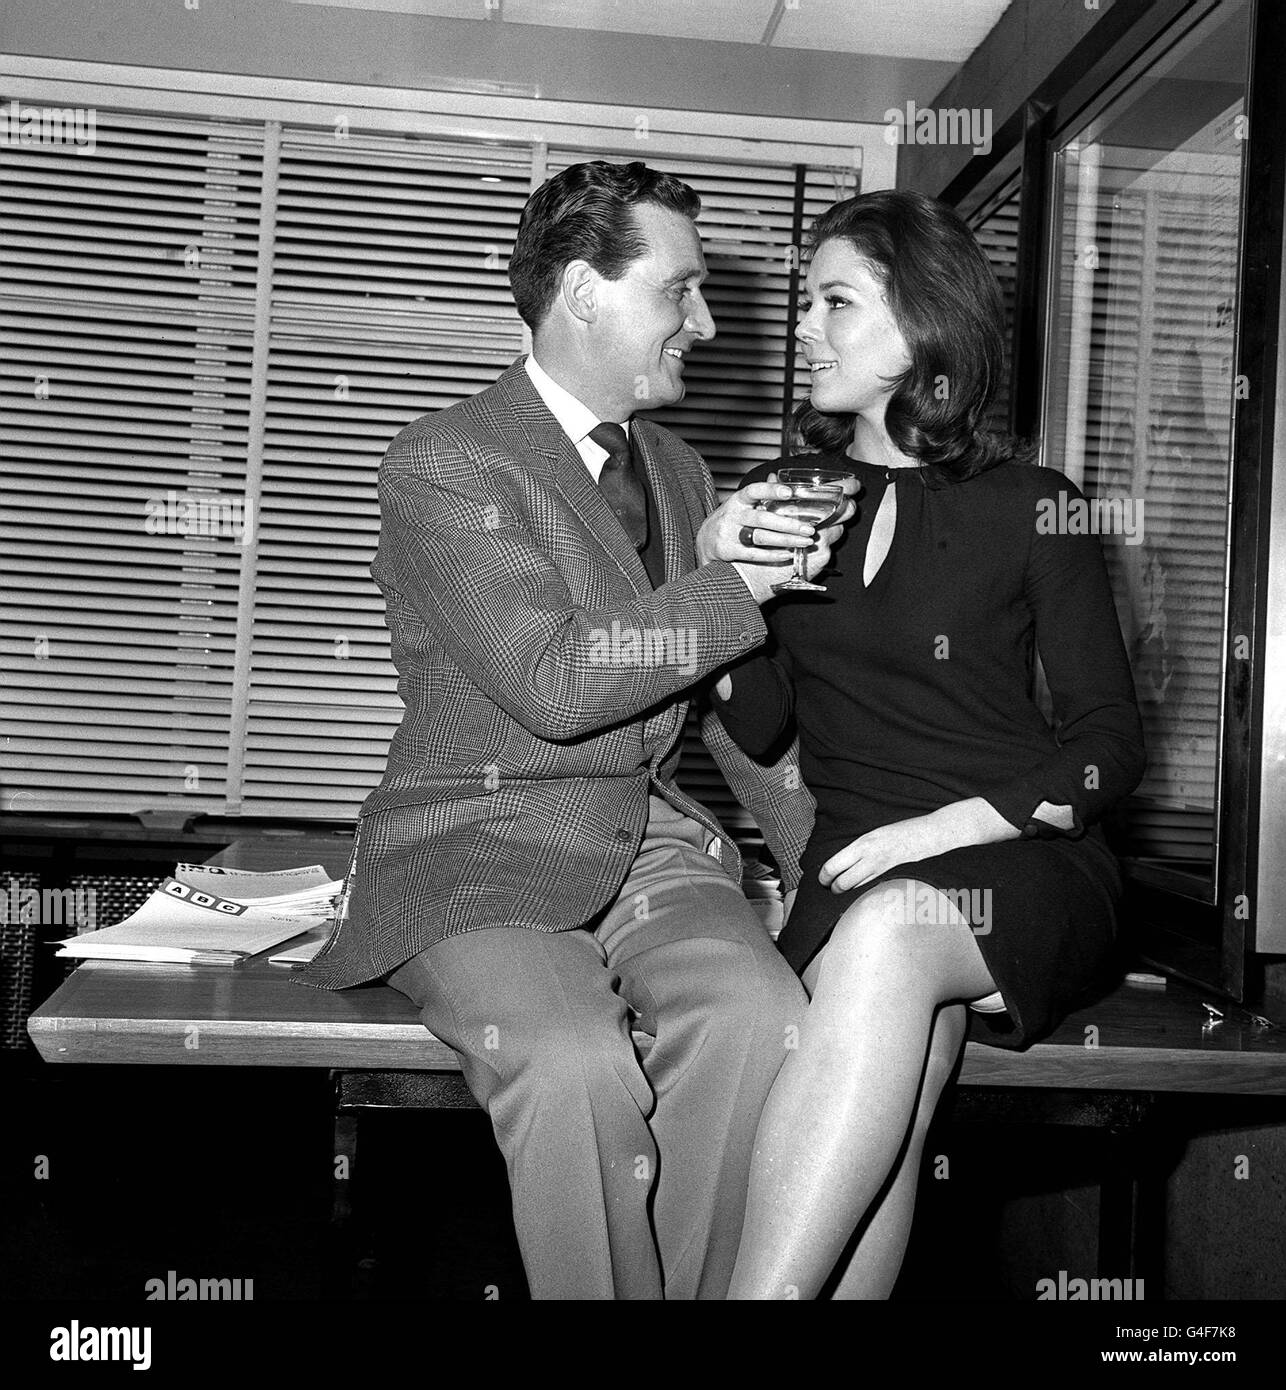 PATRICK MACNEE AND DAME DIANA RIGG WHO PLAYED JOHN STEED AND EMMA PEEL IN ABC TELEVISION SERIES 'THE AVENGERS', PICTURED HERE IN LONDON TO CELEBRATE THE NEWS OF THAT THE SERIES HAD BEEN SOLD TO THE AMERICAN BROADCASTING COMPANY TO EXCEED A TOTAL VALUE OF ONE MILLION DOLLARS Stock Photo